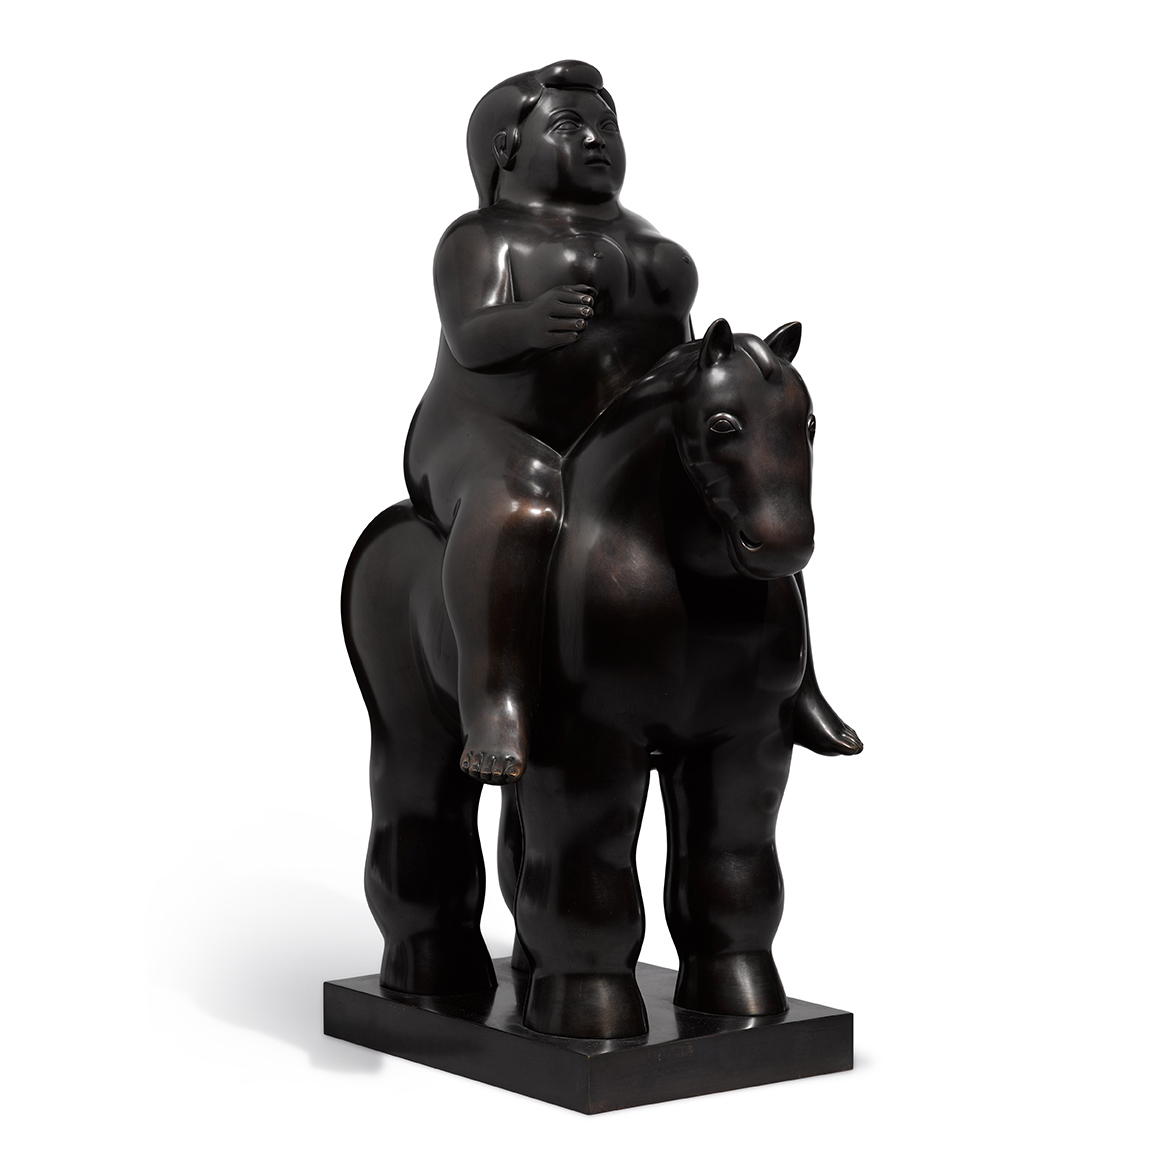 Botero Statues for Sale